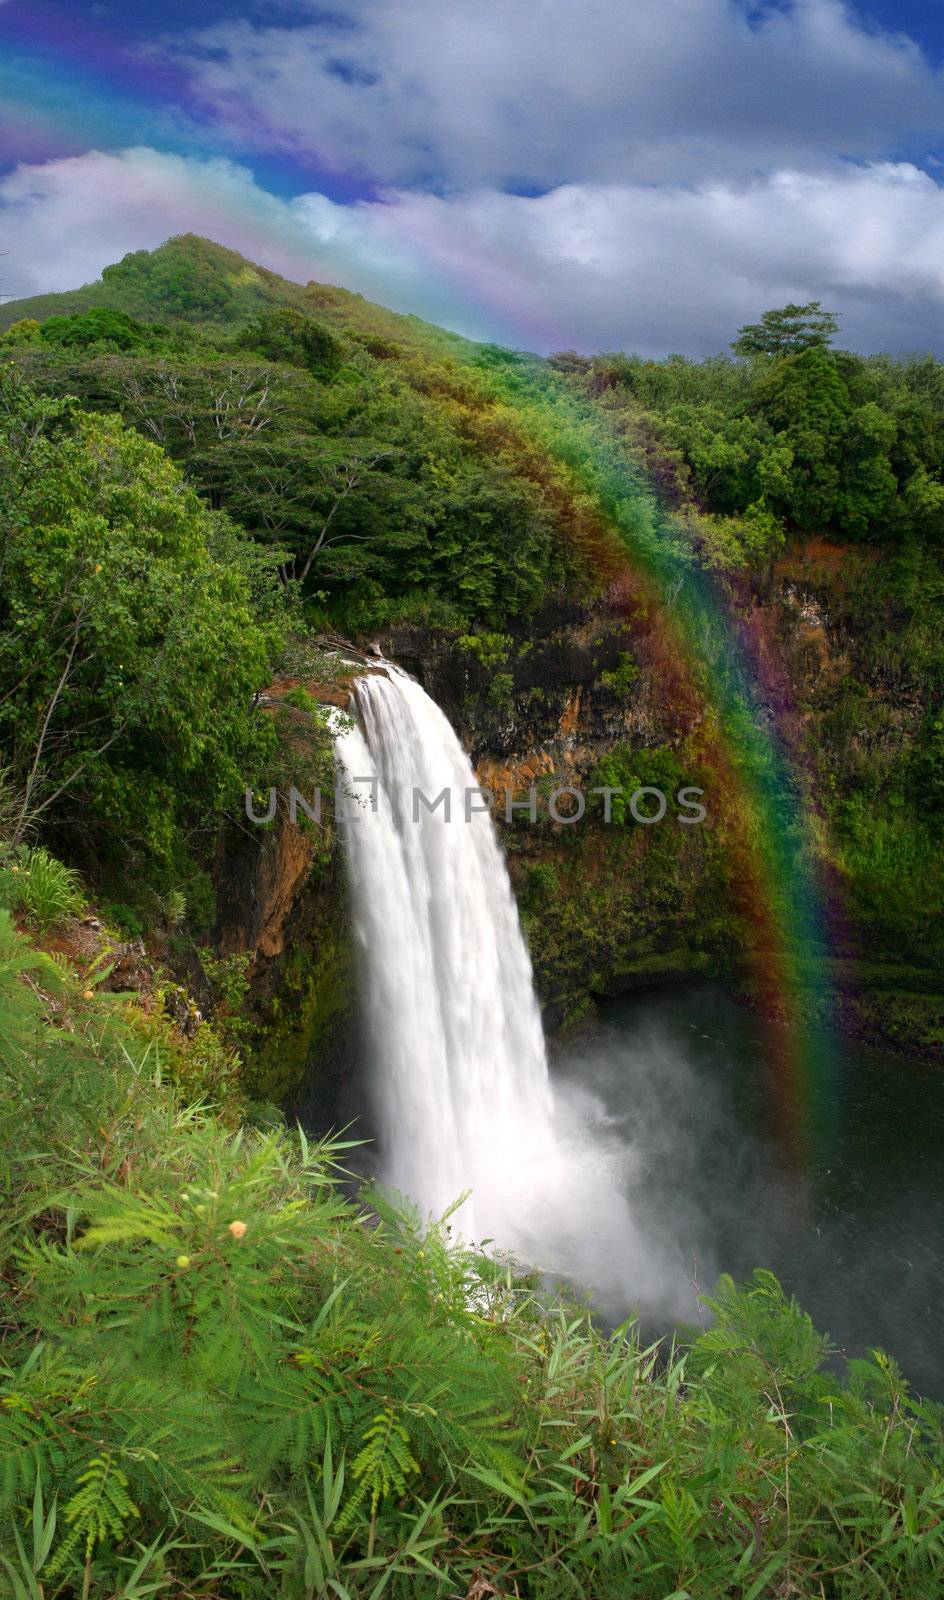 Waterfall in Hawaii With a Colorful Fantastic Rainbow 